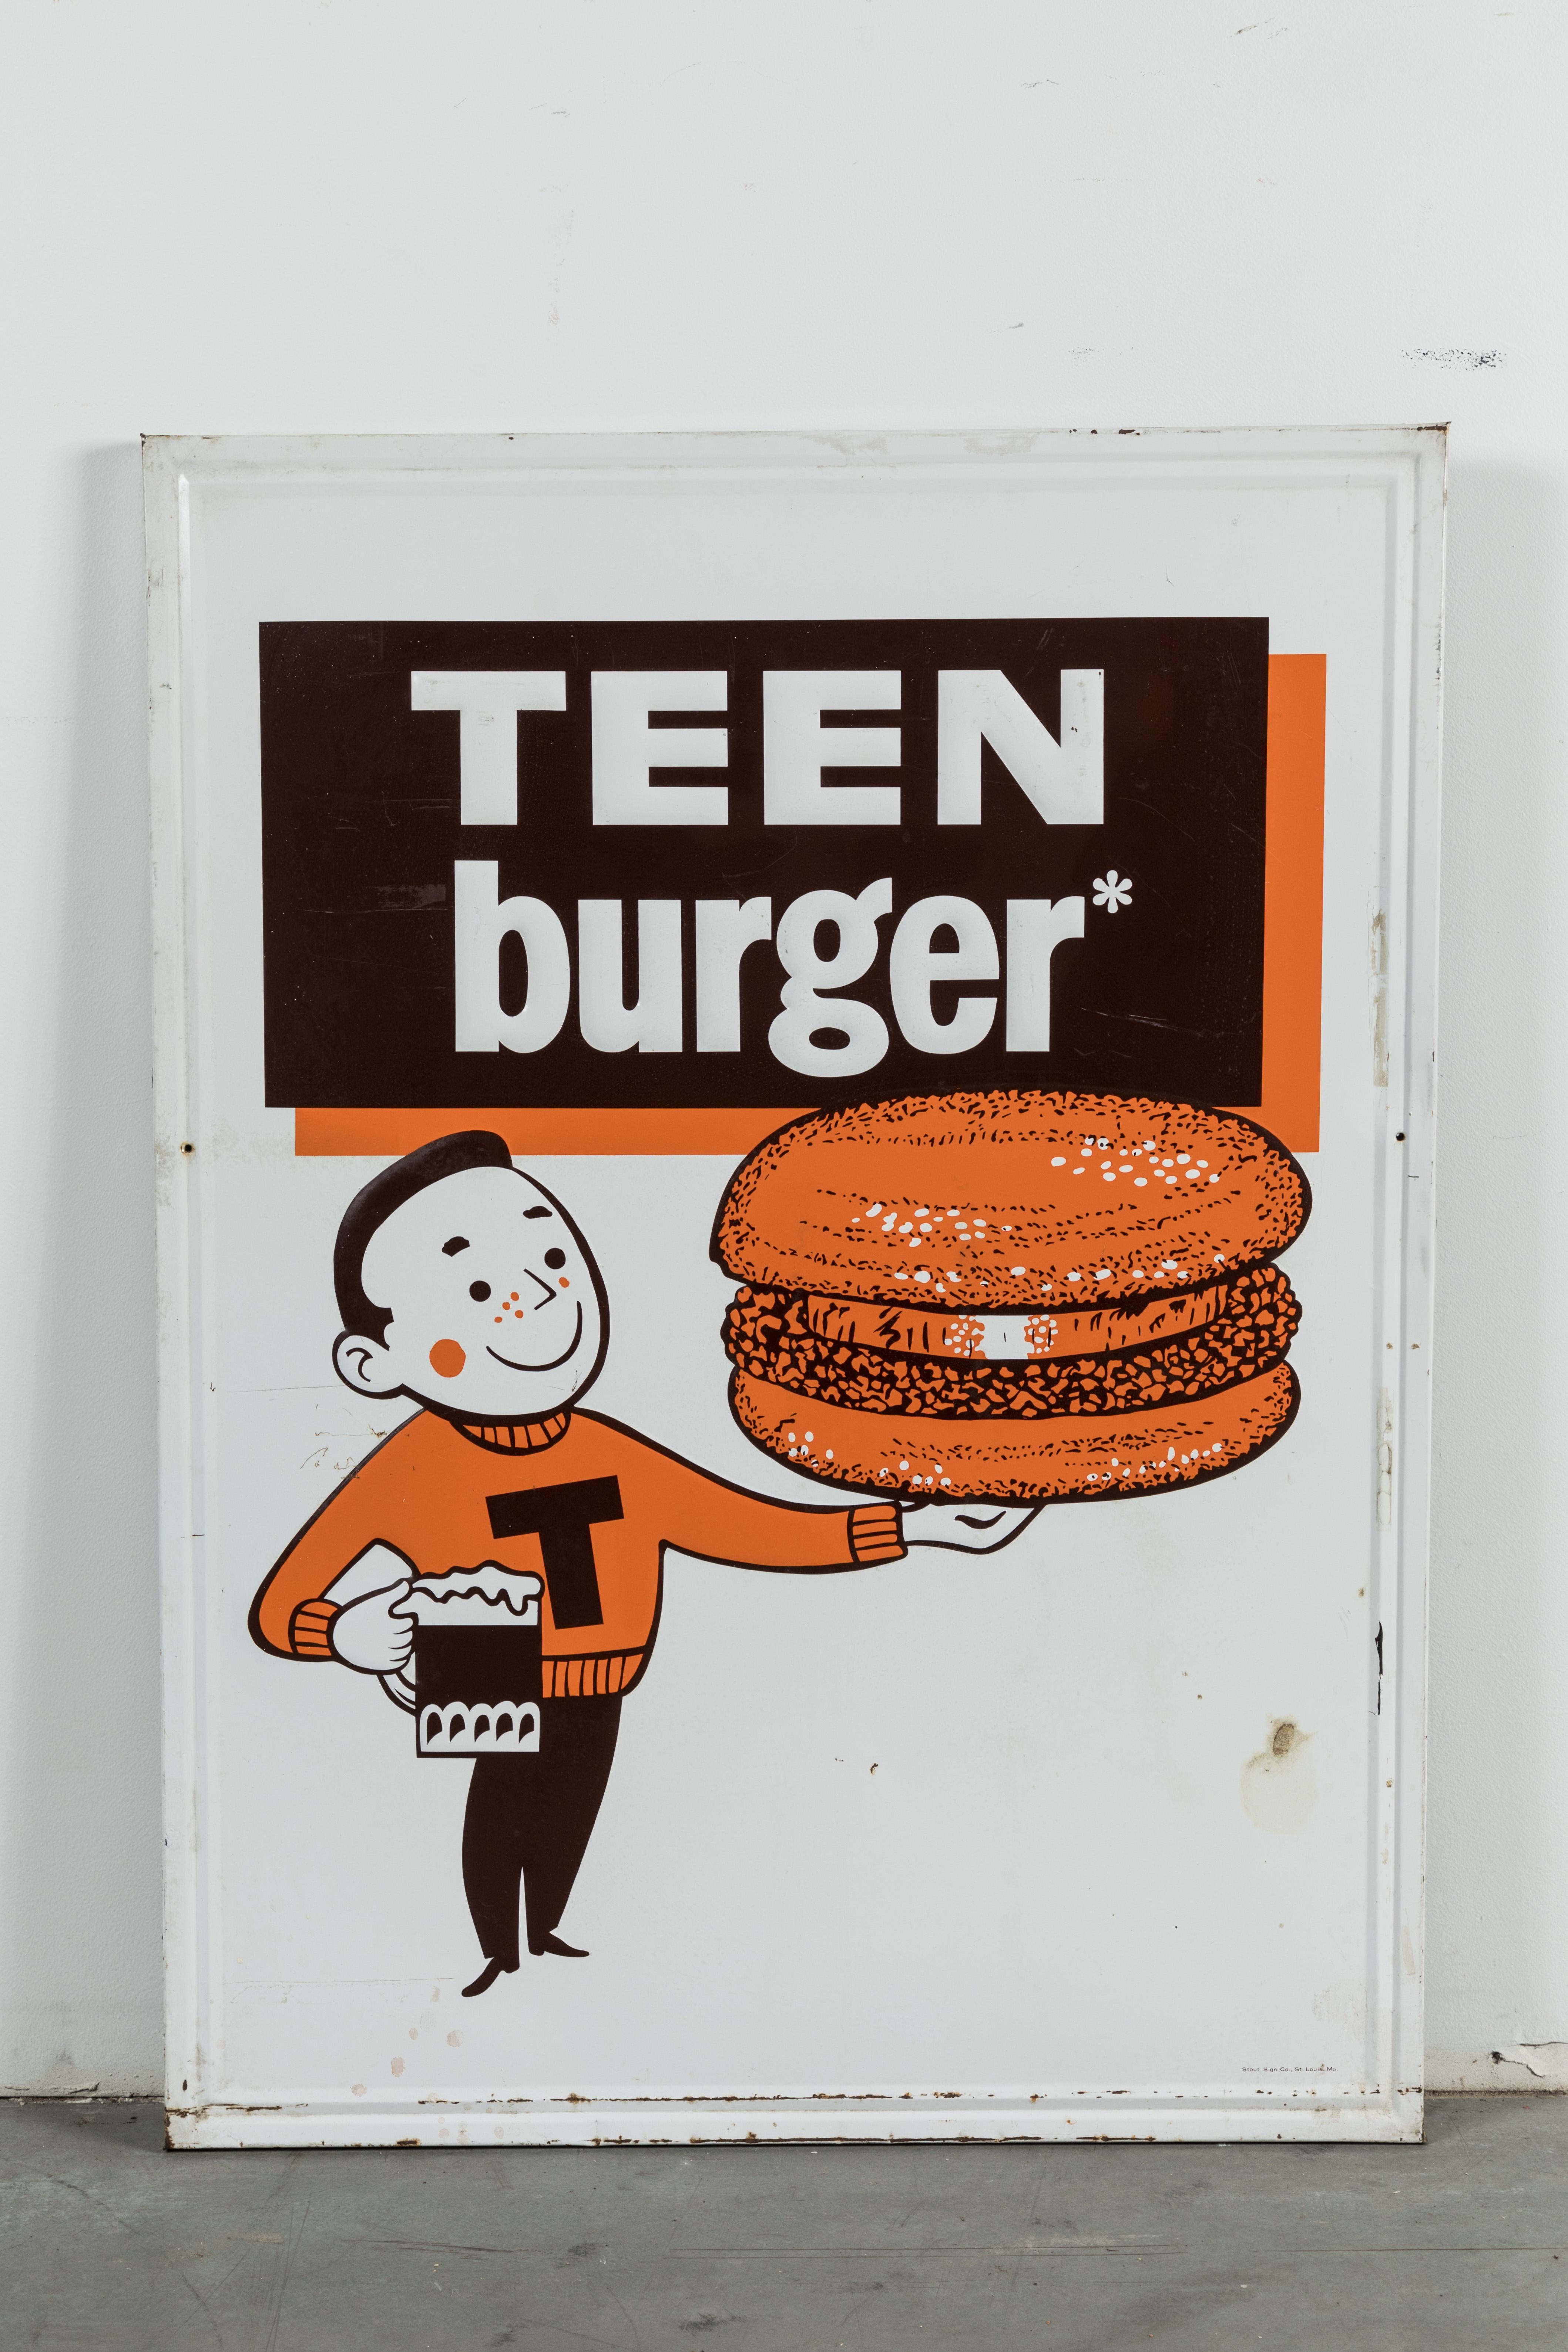 In 1963, A&W introduce four choices of hamburgers and their corresponding burger family members. Papa Burger, Mama Burger, Teen Burger and Baby Burger. Each burger wrapper had a wrapper featuring a cartoon image of the corresponding character.